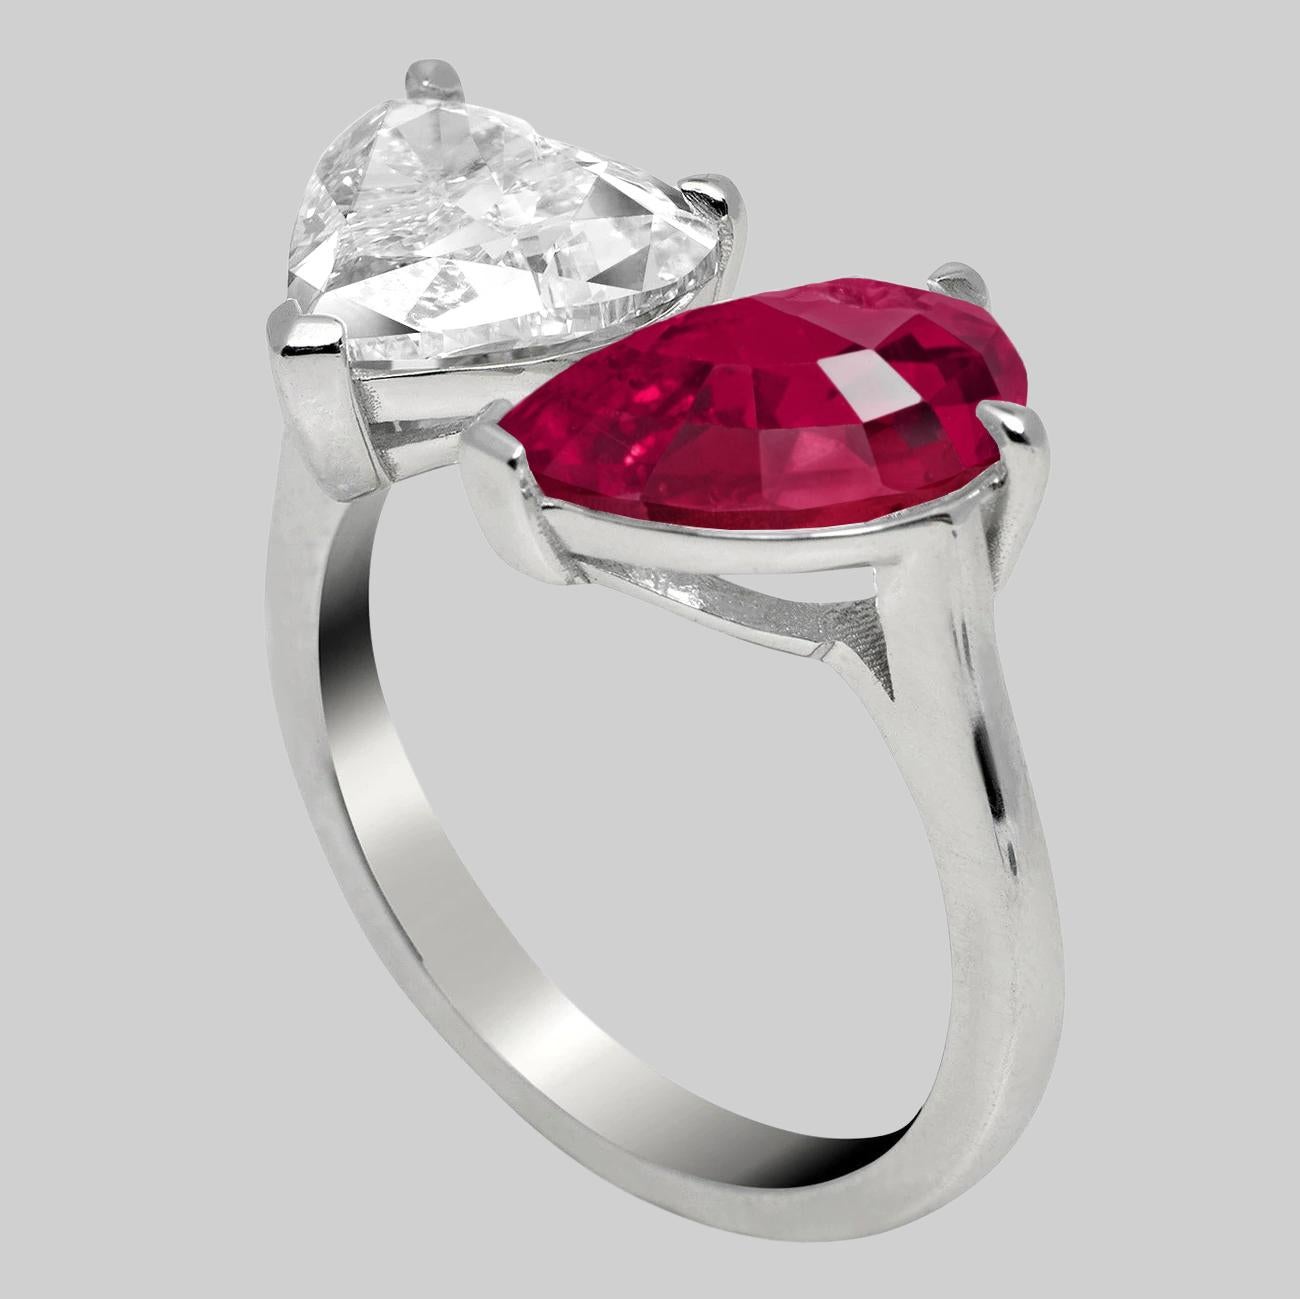 An amazing bypass moi & toi platinum ring set with a 2 carat flawless heart shape diamond certified by GIA and a 3 carat IGI Antwerp pear cut ruby platinum ring.